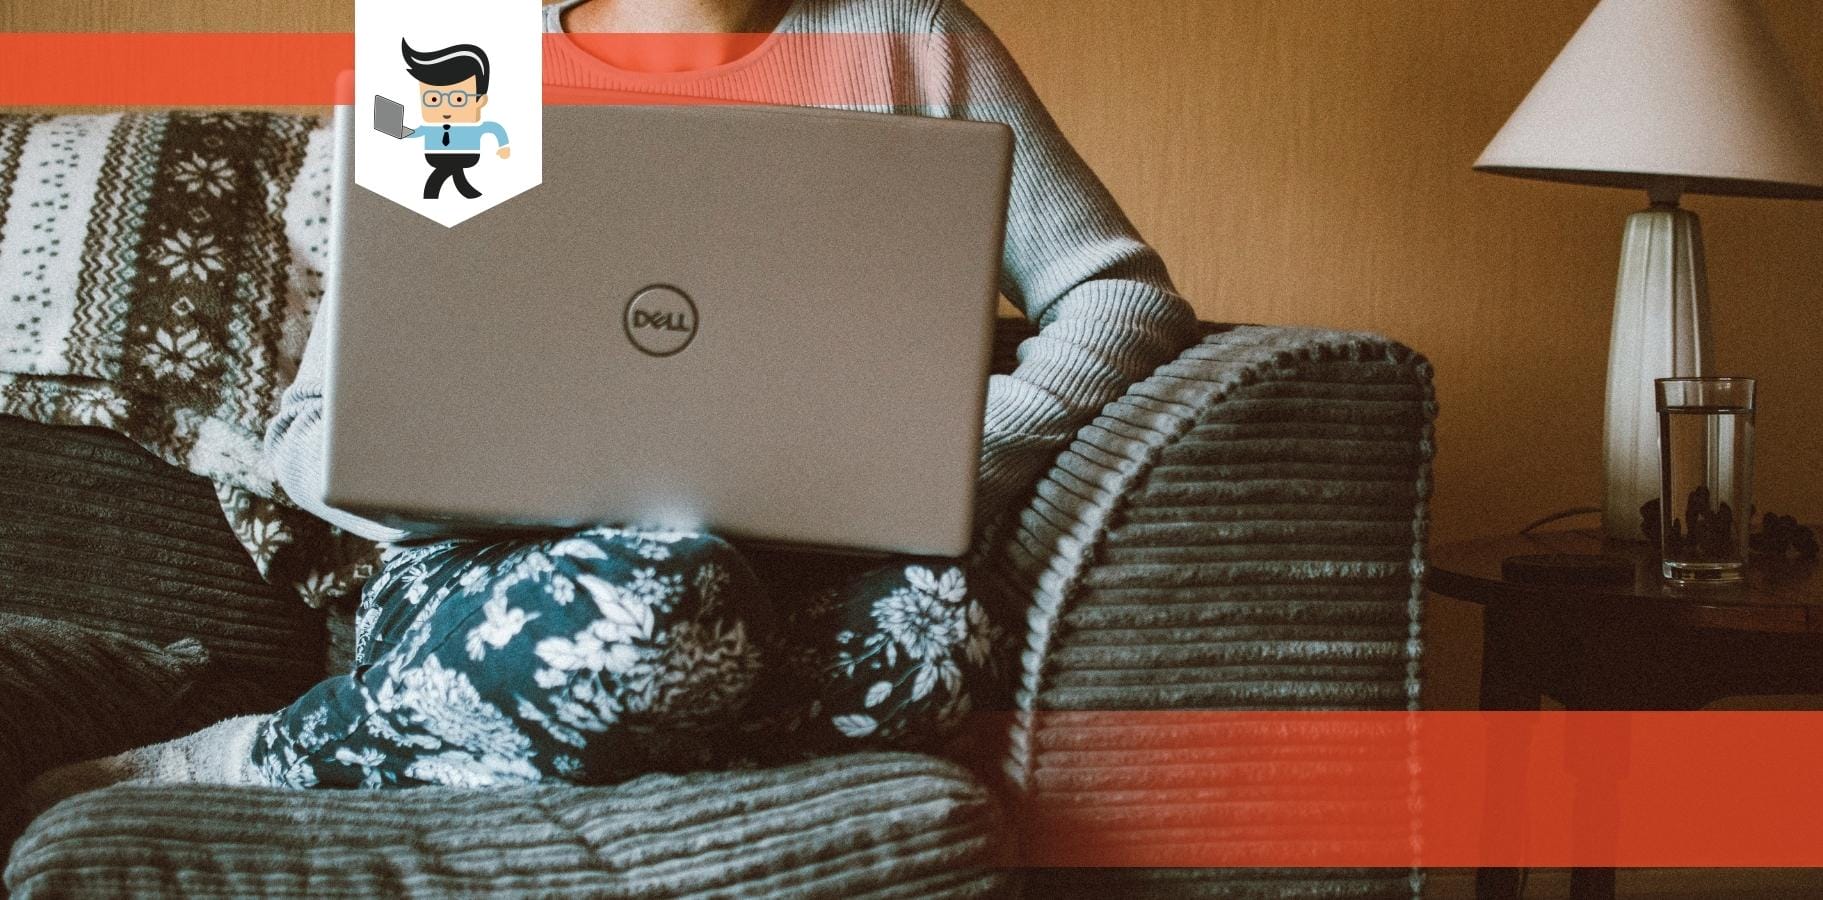 Inspiron vs Vostro: Which Is the Best Dell Laptop Among the Rest?